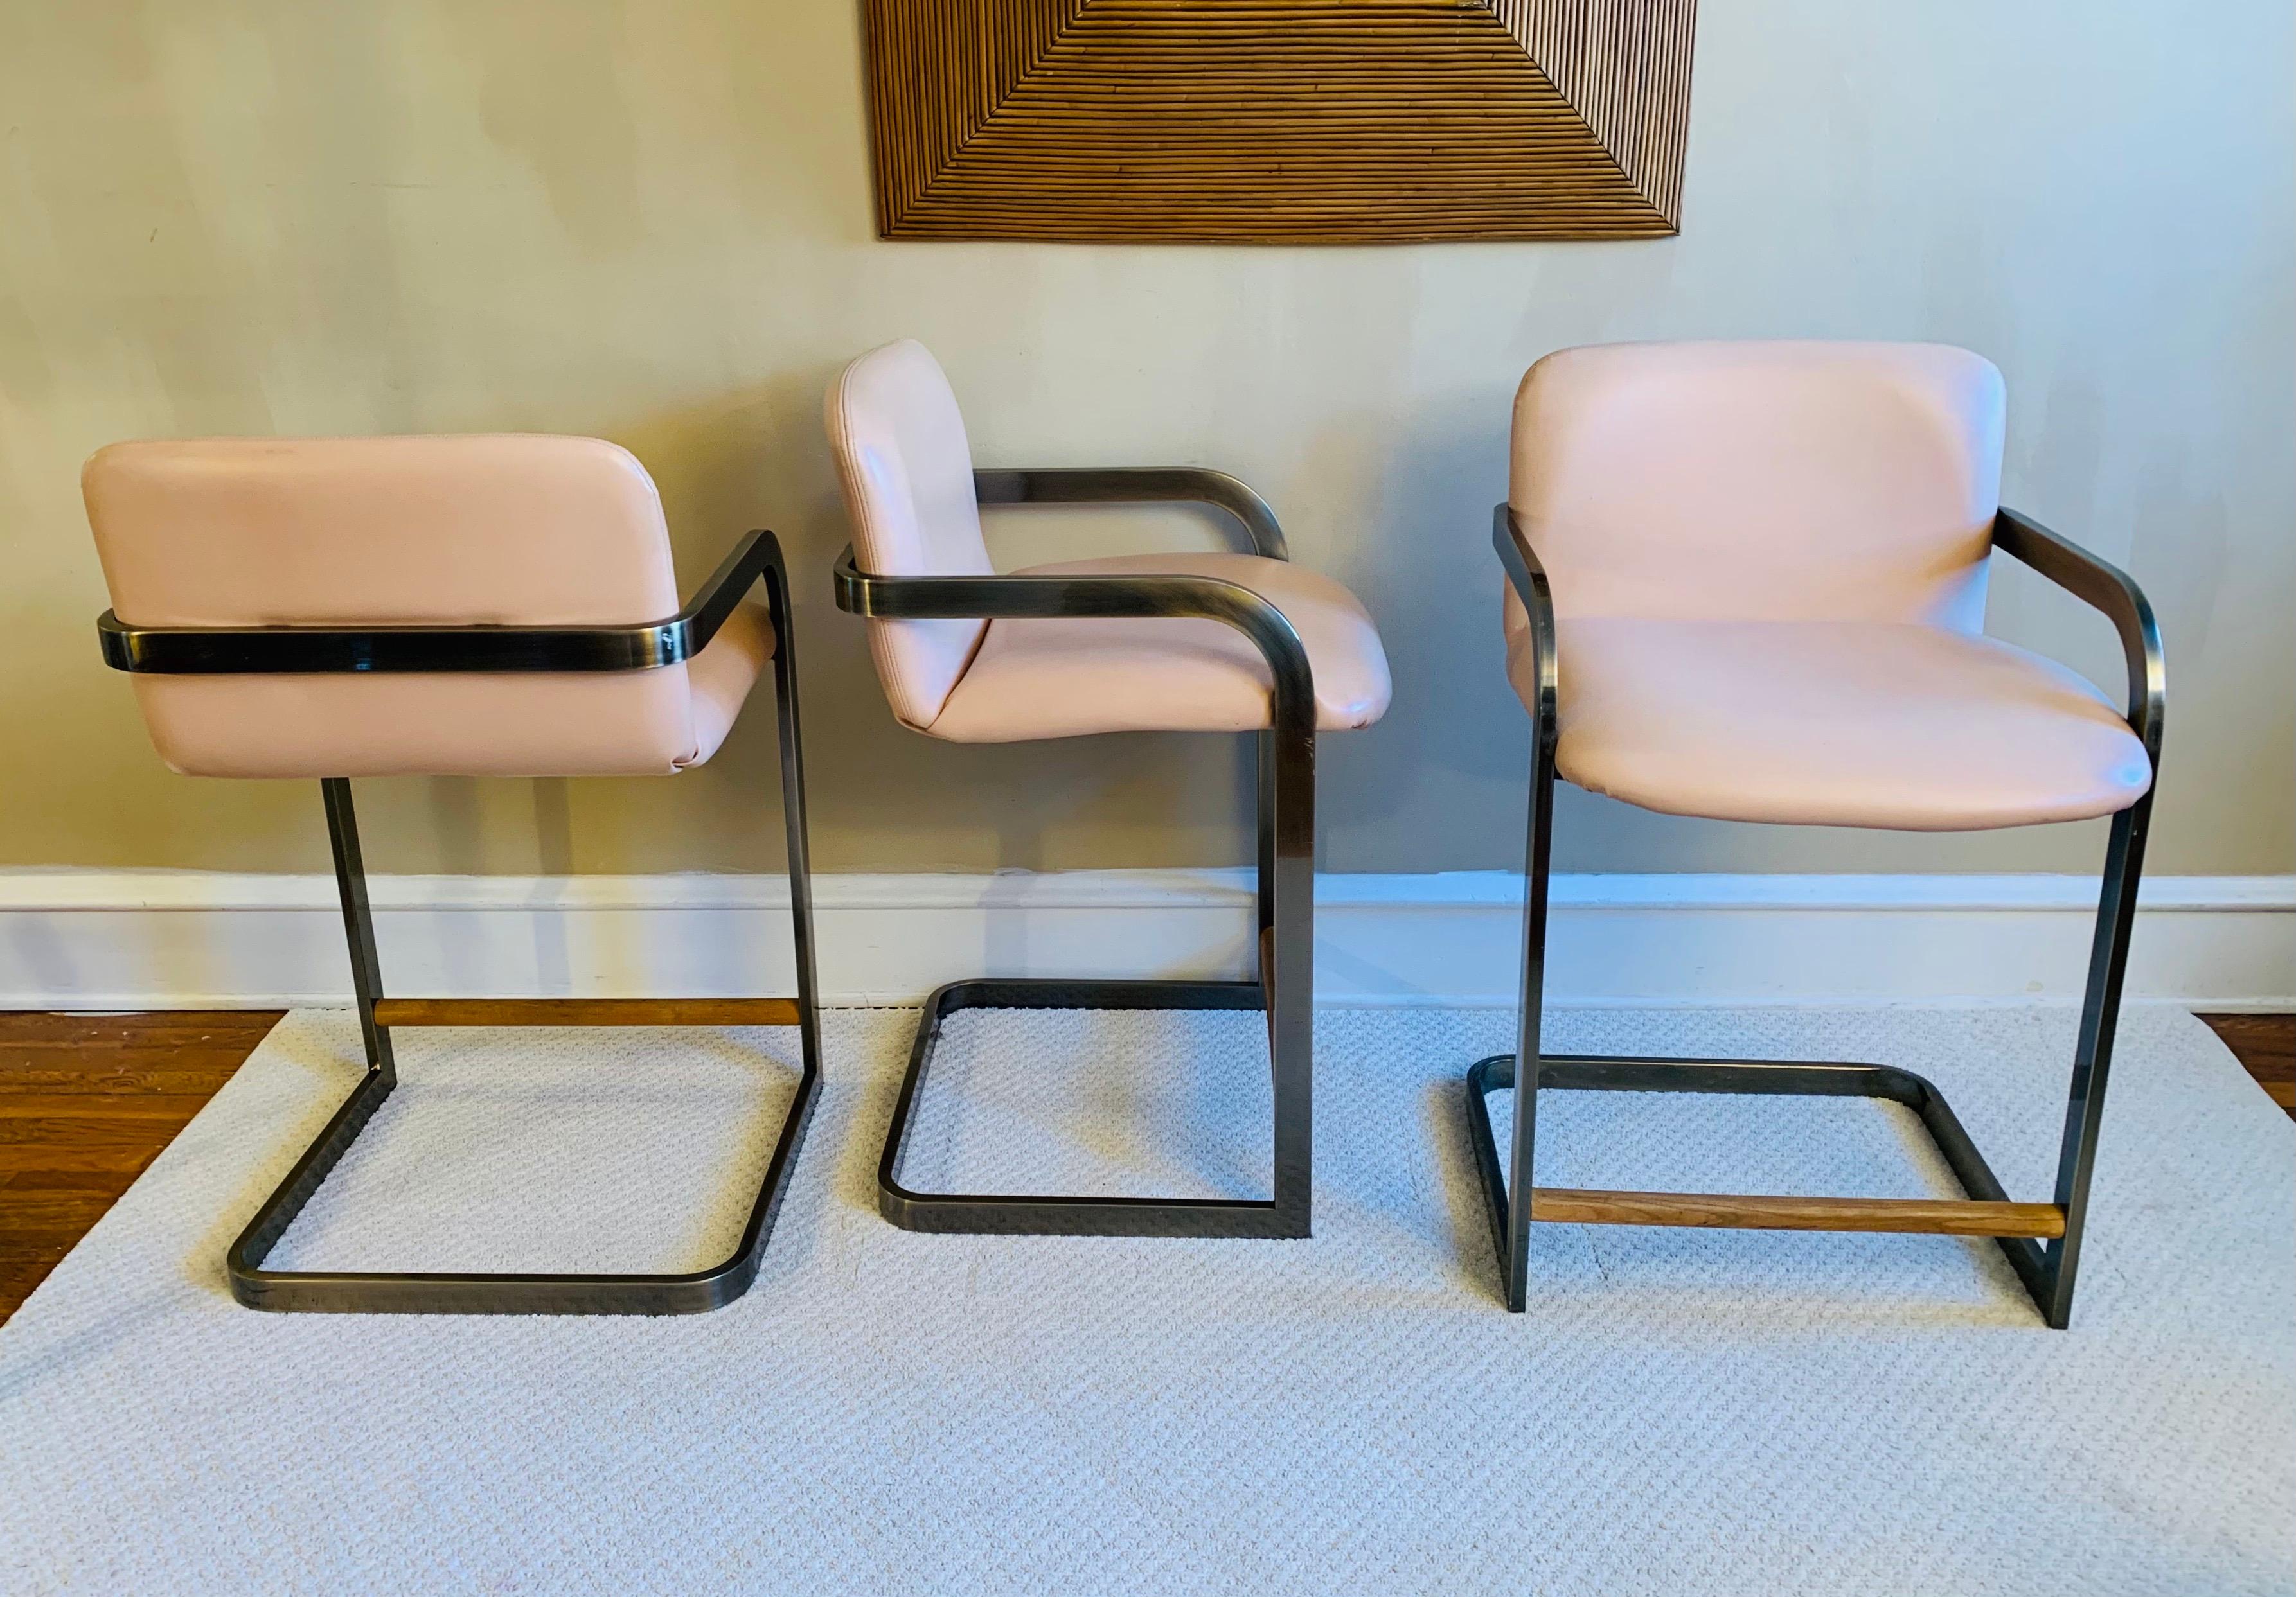 A wonderful trio of scarce cantilever stools that is often attributed to Milo Baughman, yet these retain the original tags from D.I.A. The word is still out as to if Milo was actually a designer under the DIA label. 

Due to the hue of the